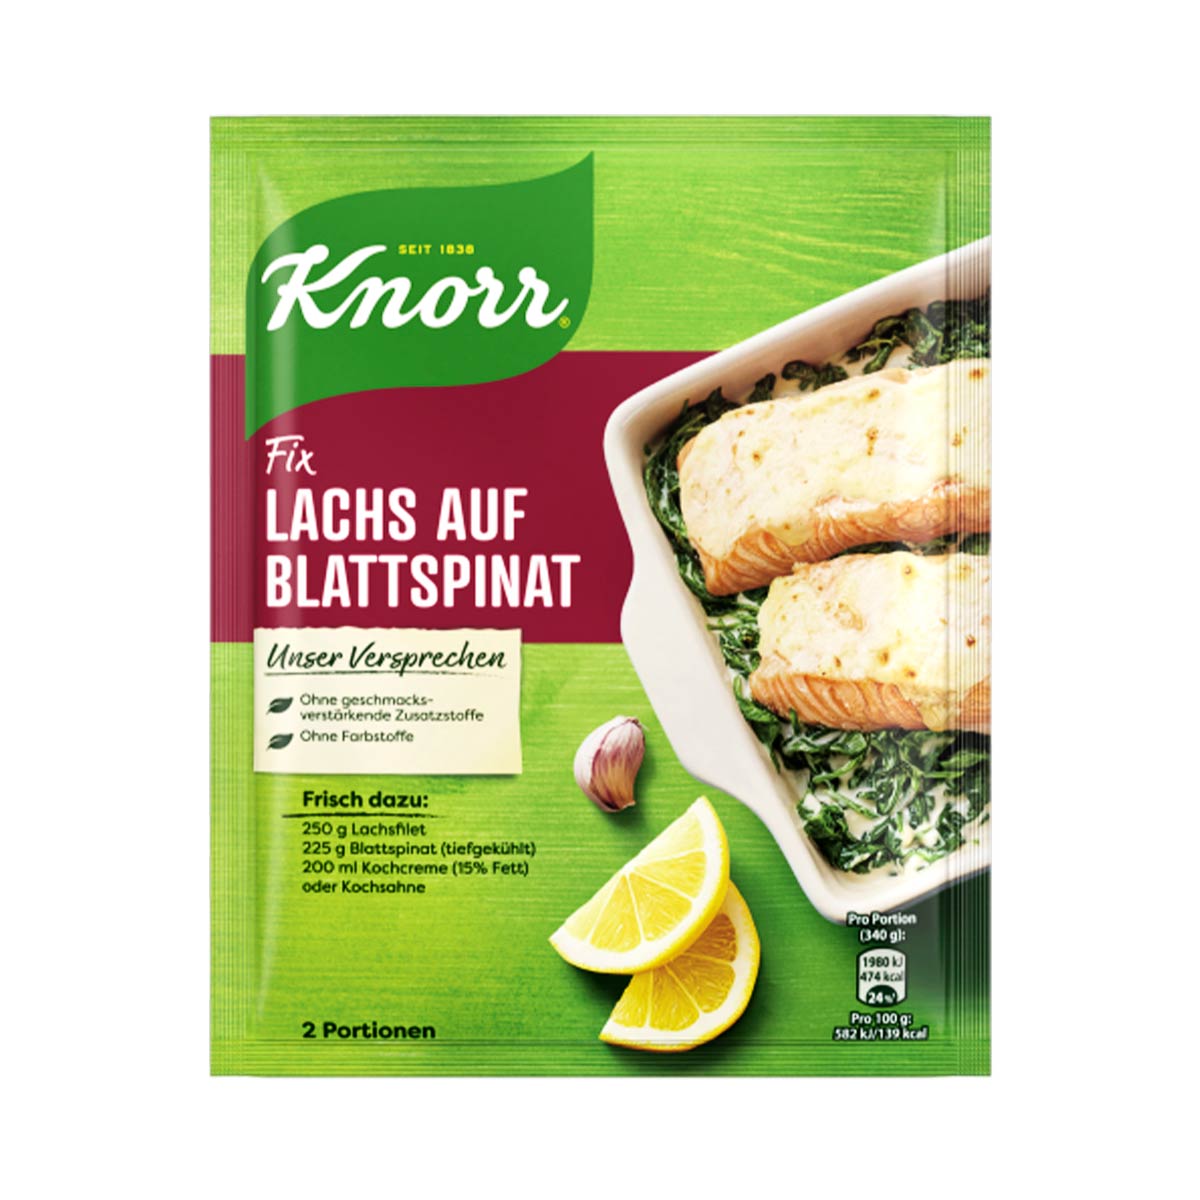 Spinach, with oz (28 for 1 Salmon Knorr g) Fix